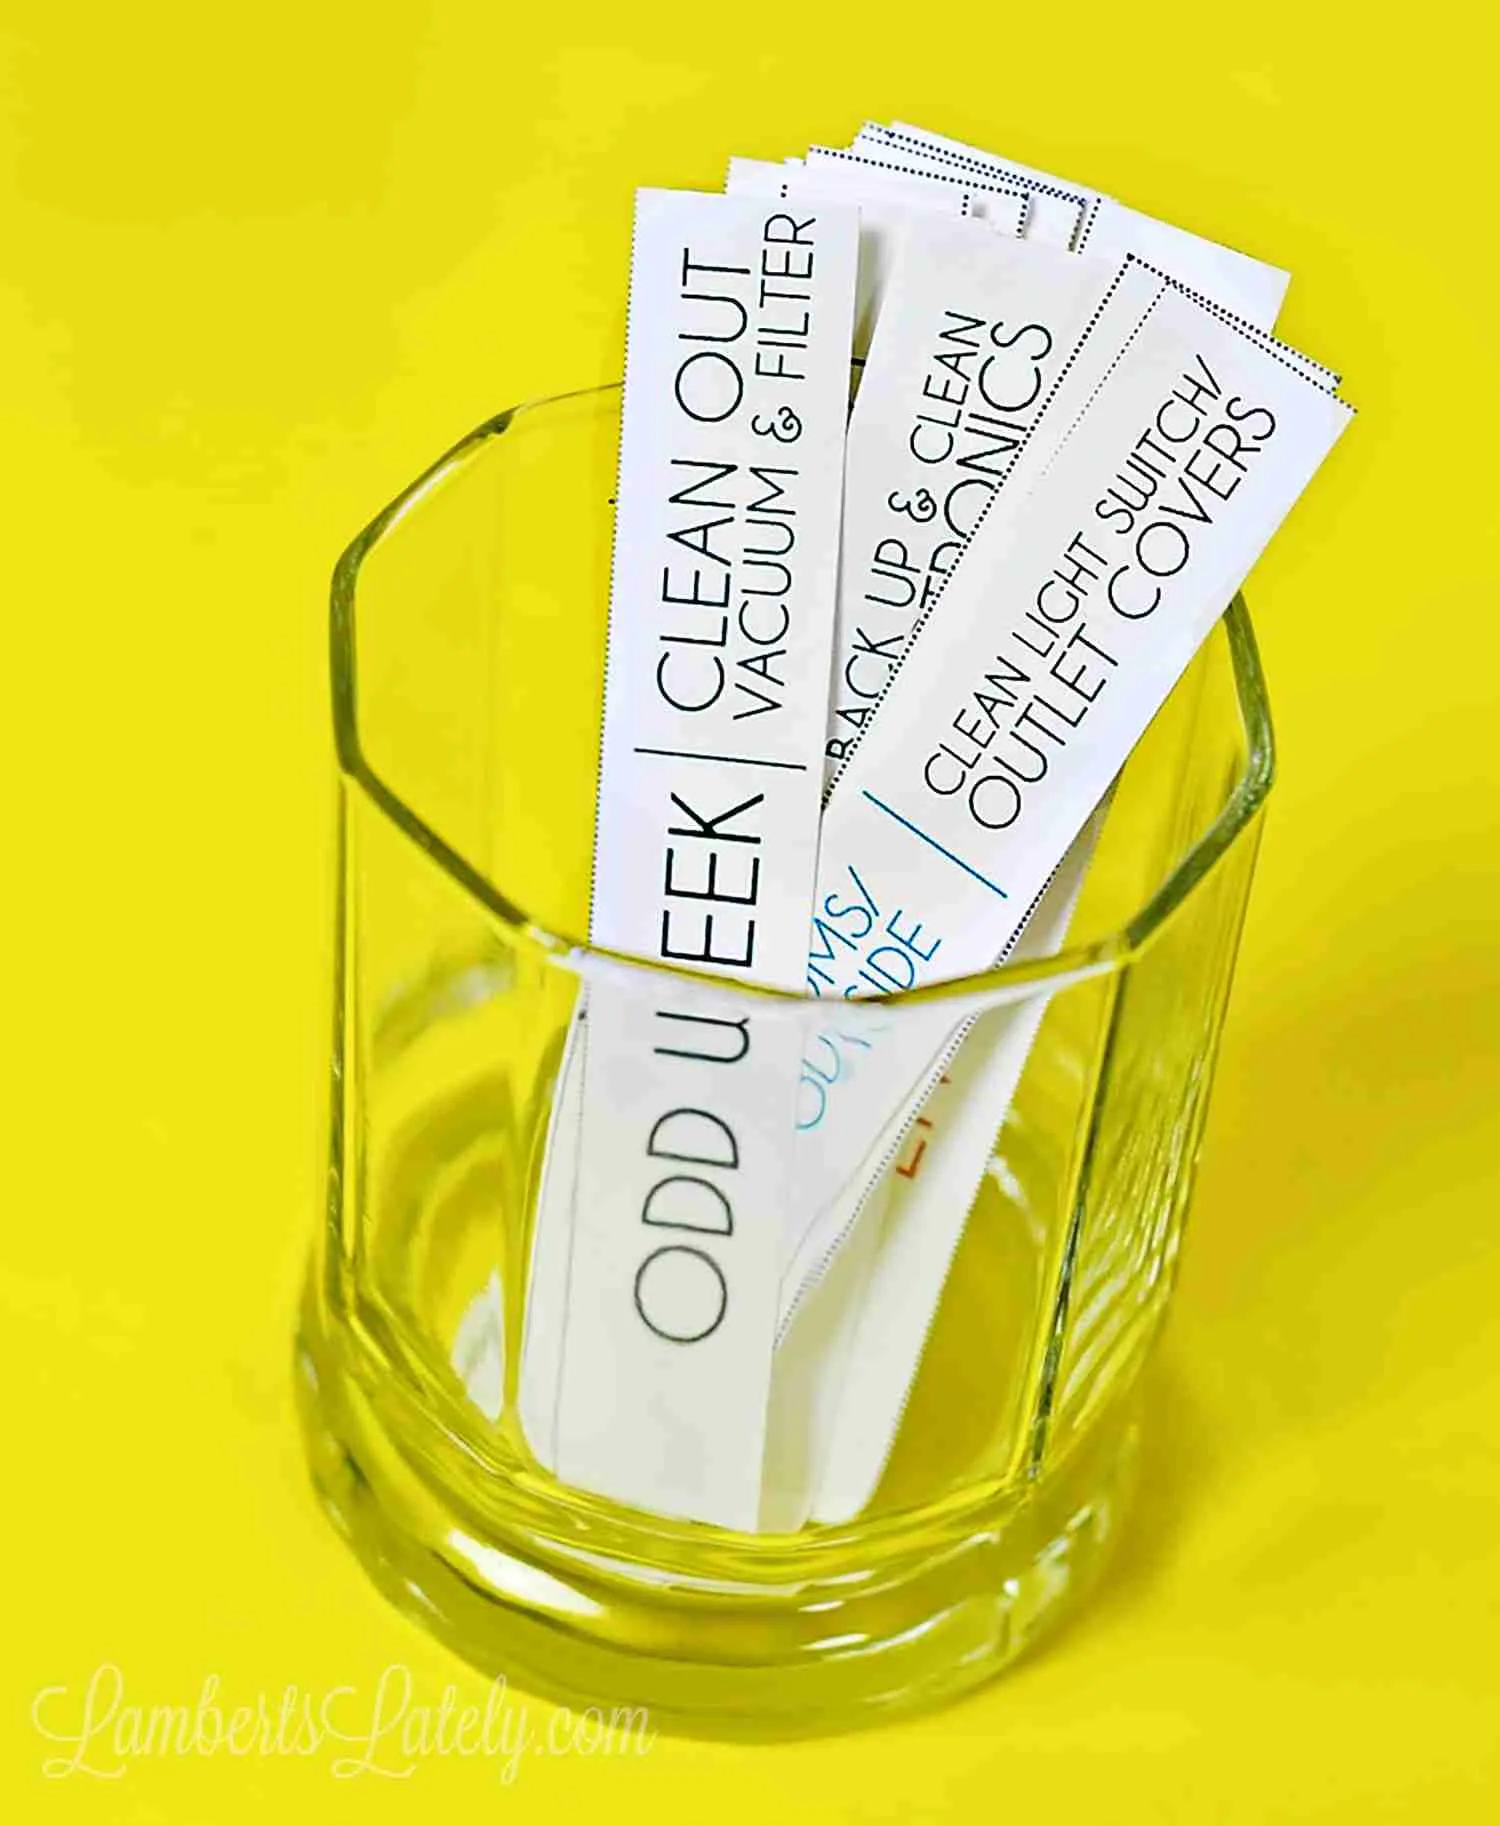 chore cards in a glass with yellow background